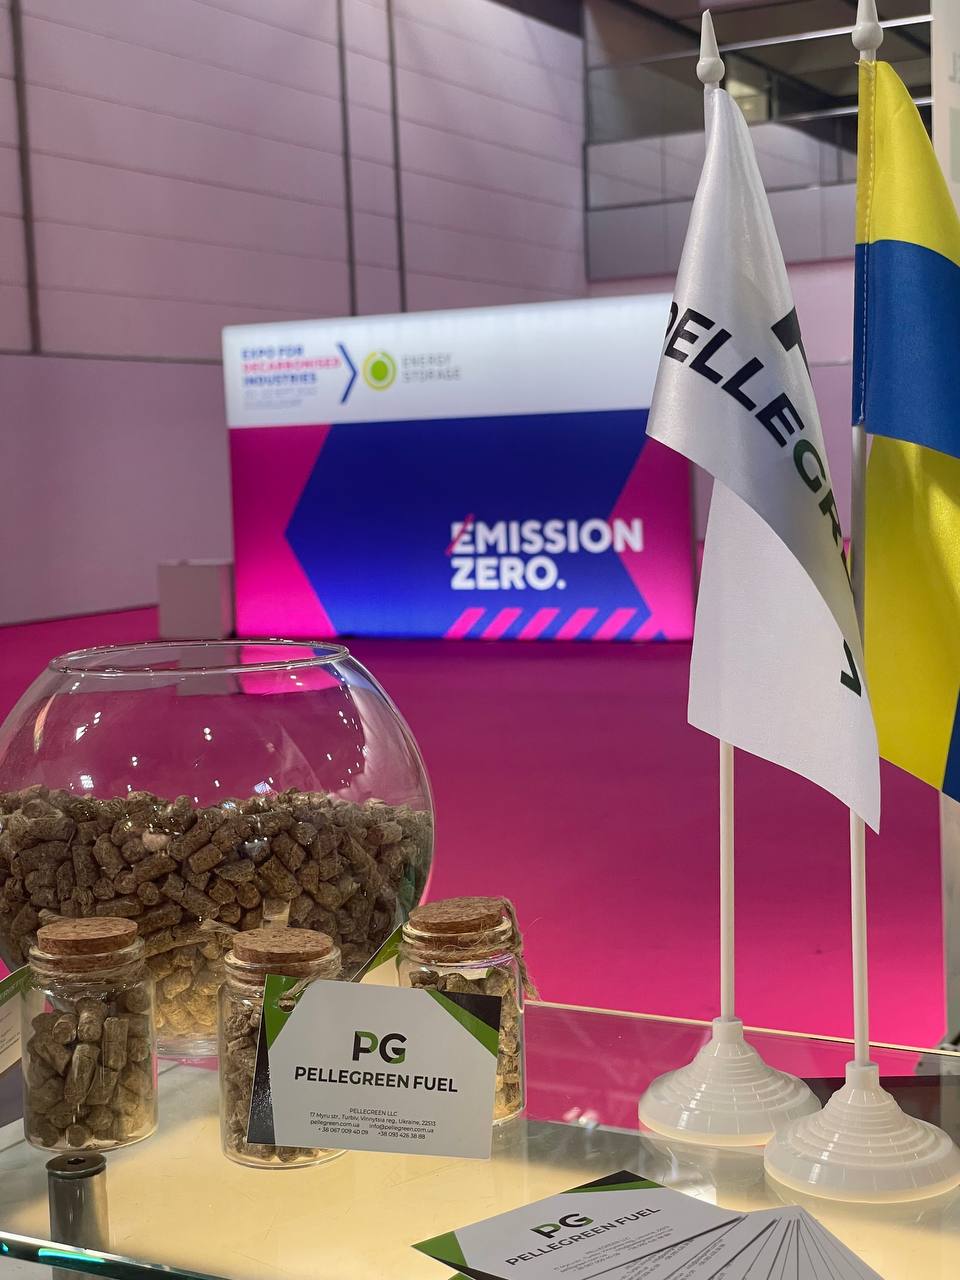 PELLEGREEN participated in the international exhibition Expo for Decarbonised Industries